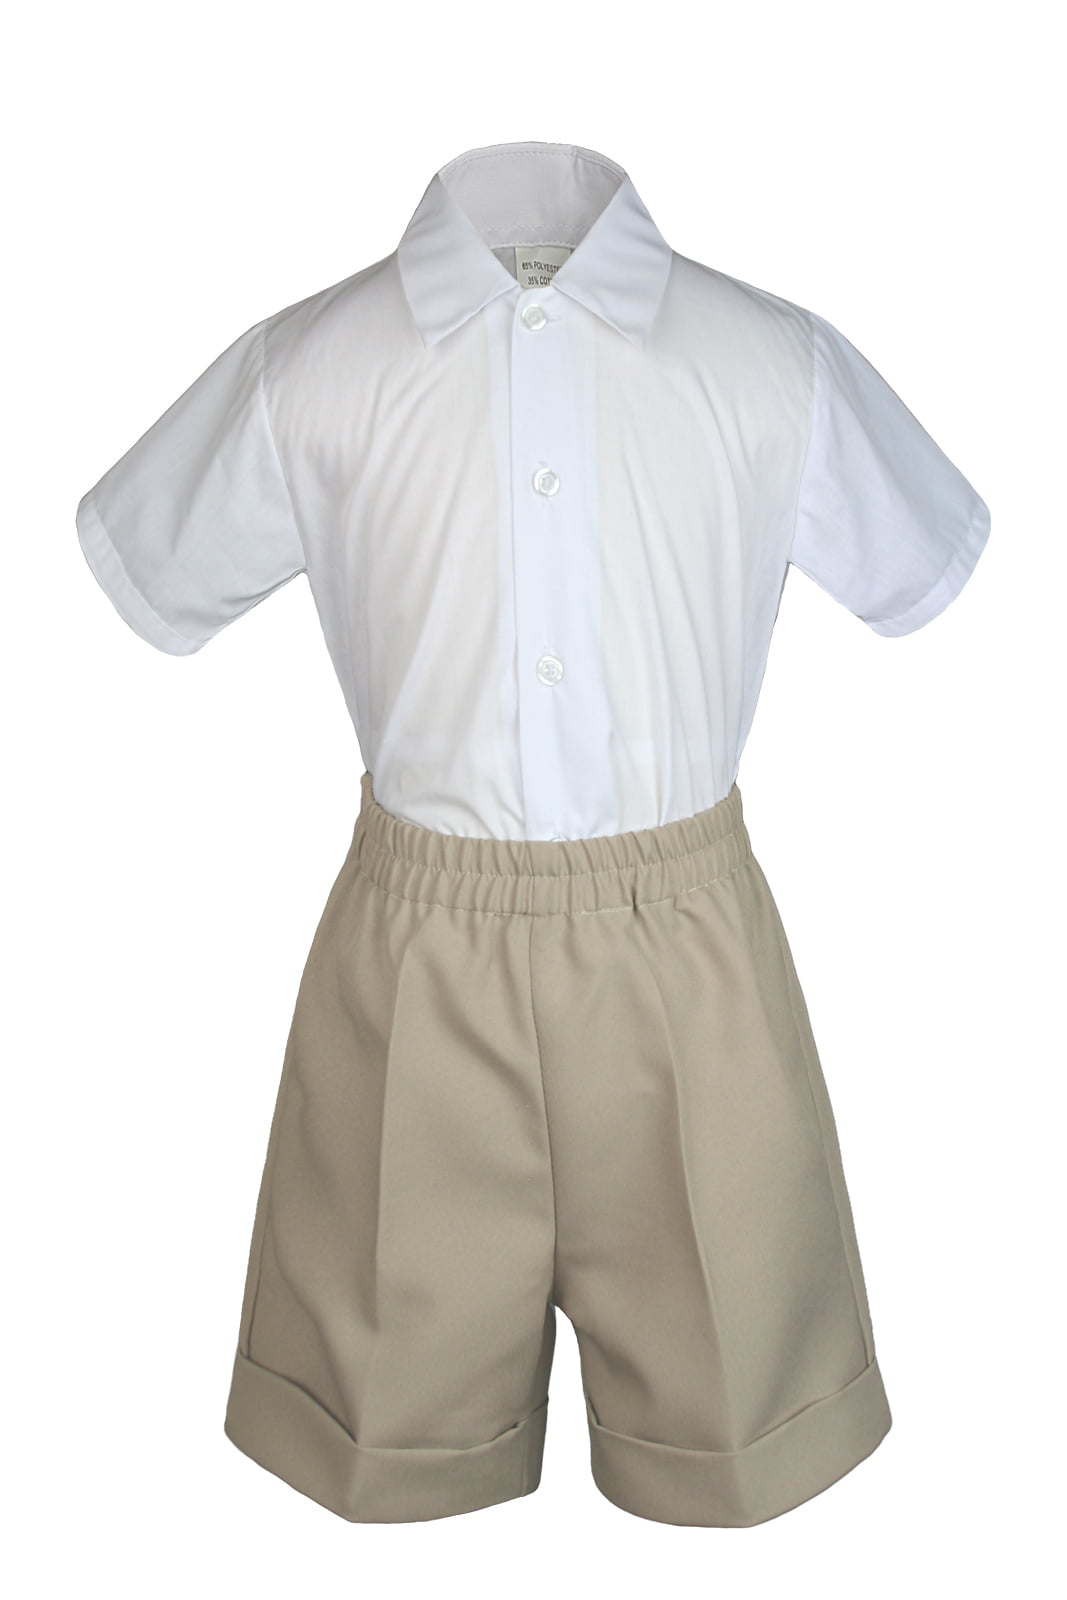 2pc Color Formal Party Wedding Shirt Shorts Set New Born Baby Boy Toddler Sm-4T 